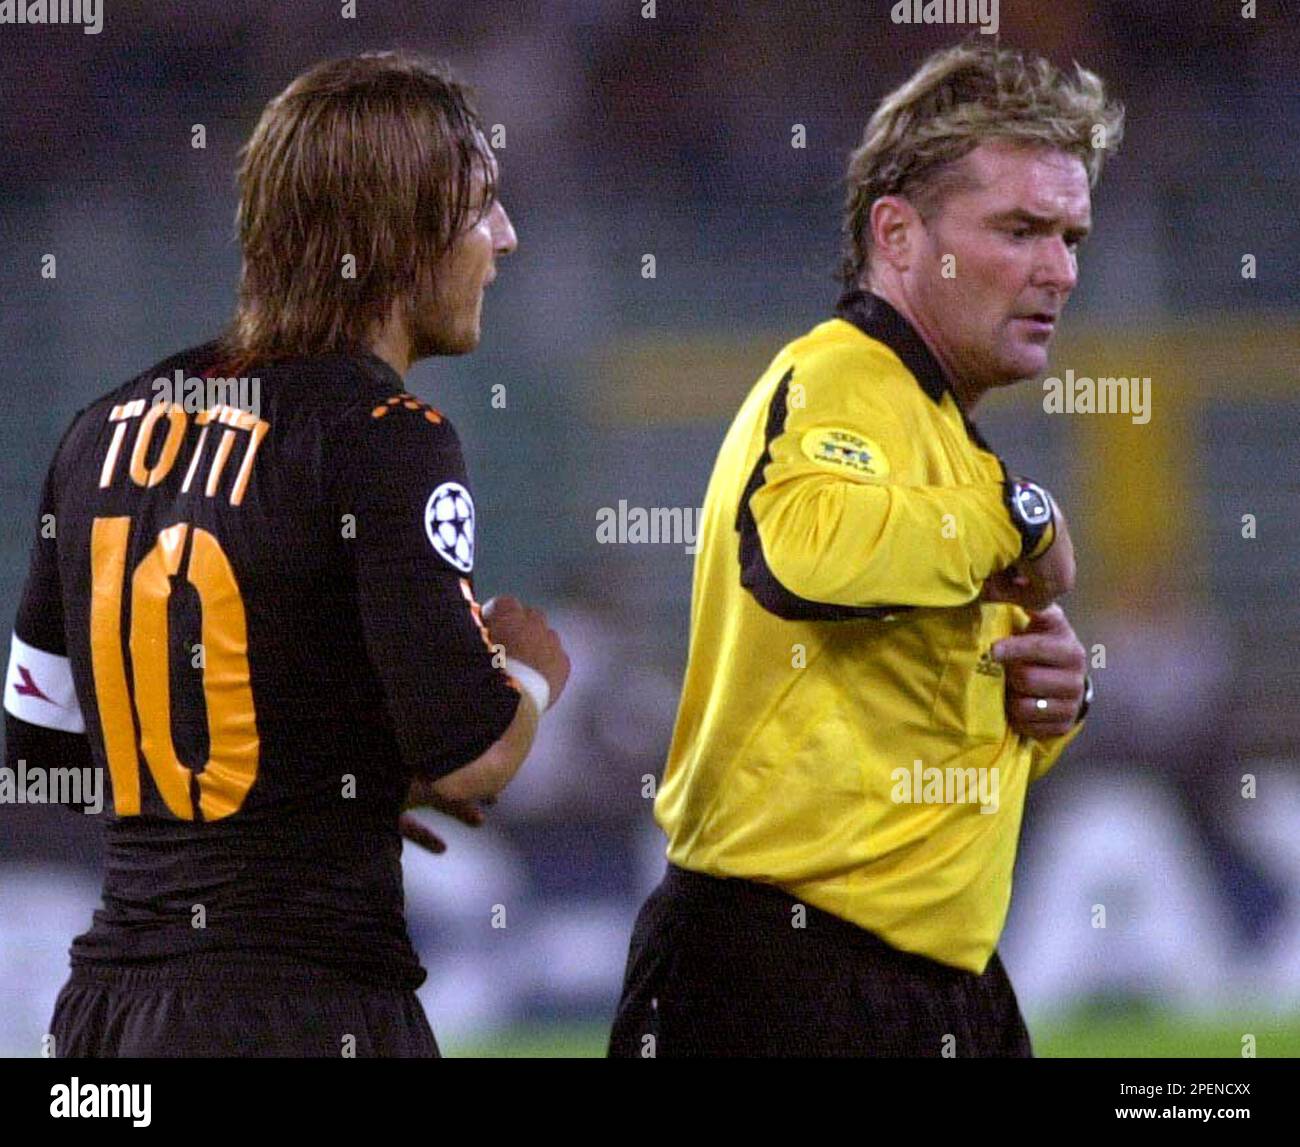 AS Roma Francesco Totti, left, argues with Swedish Referee Anders Frisk as he puts his hands to his side pocket during the Group B, Champions League soccer match between Dinamo Kiev and Roma in Rome's Olympic stadium, Wednesday, Sept. 15, 2004. (AP Photo/Giuseppe Calzuola) Stock Photo